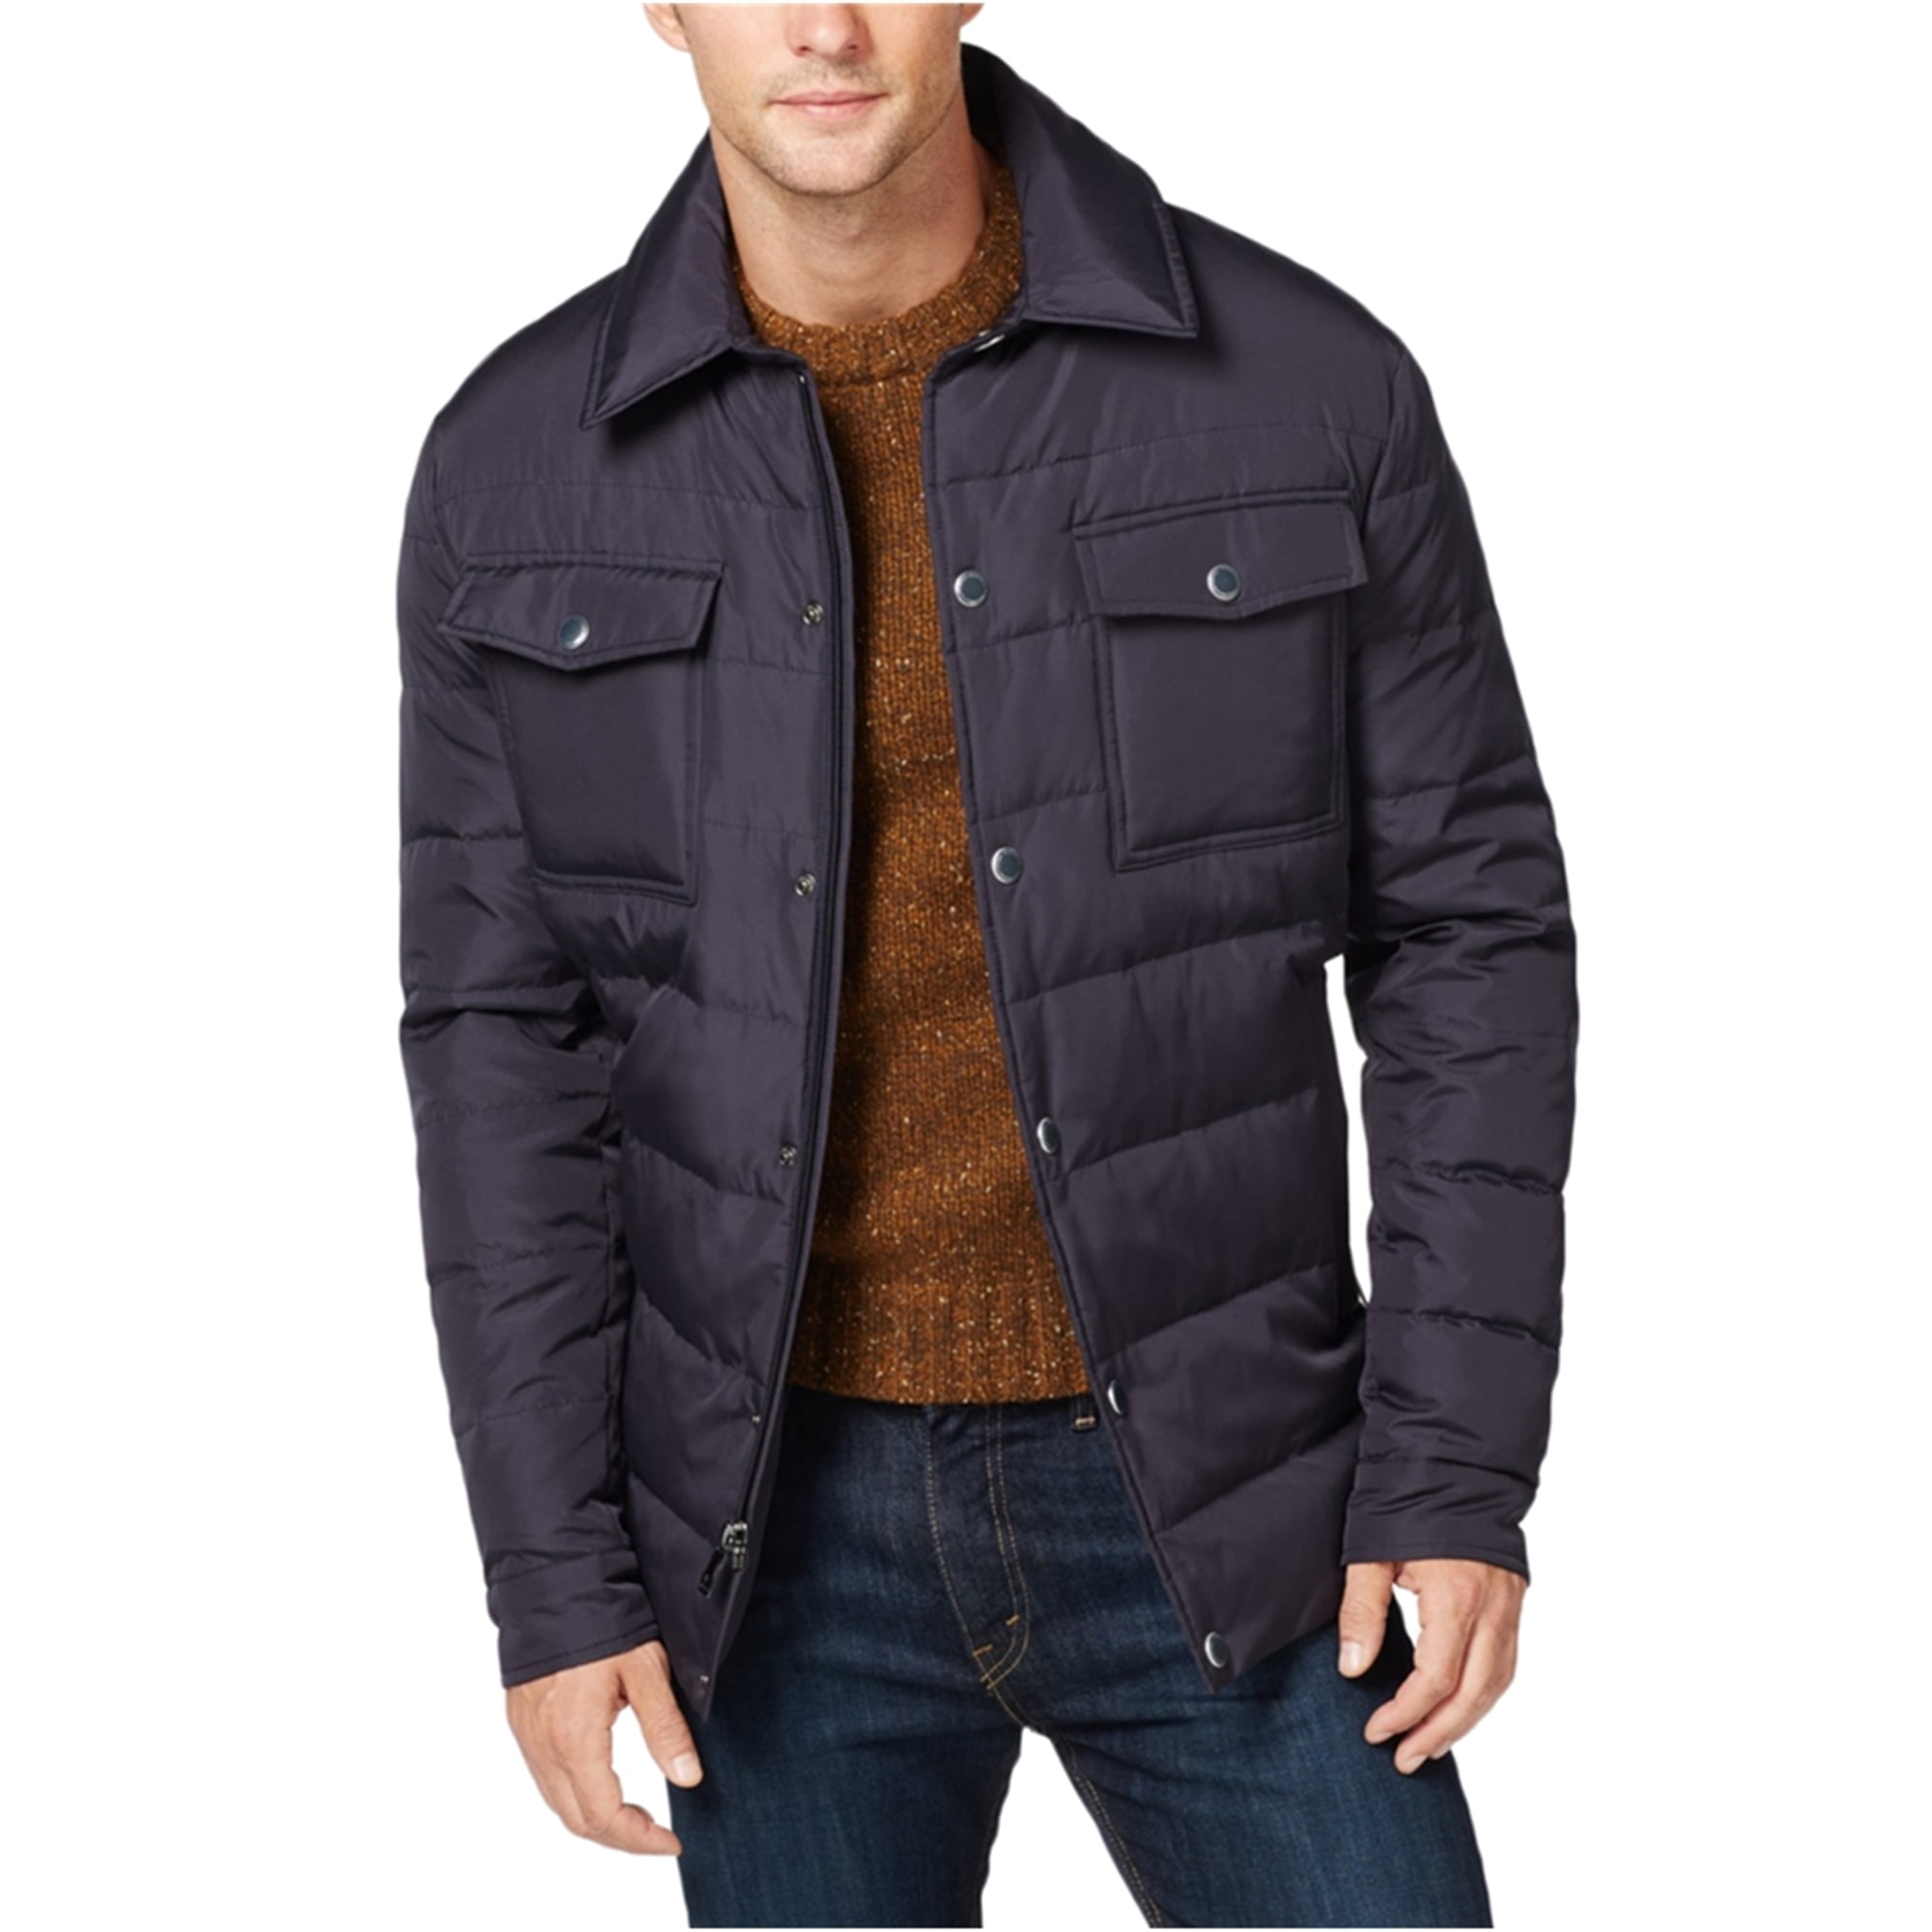 Ryan Seacrest Mens Down Cpo Quilted Jacket, Blue, Large - Walmart.com